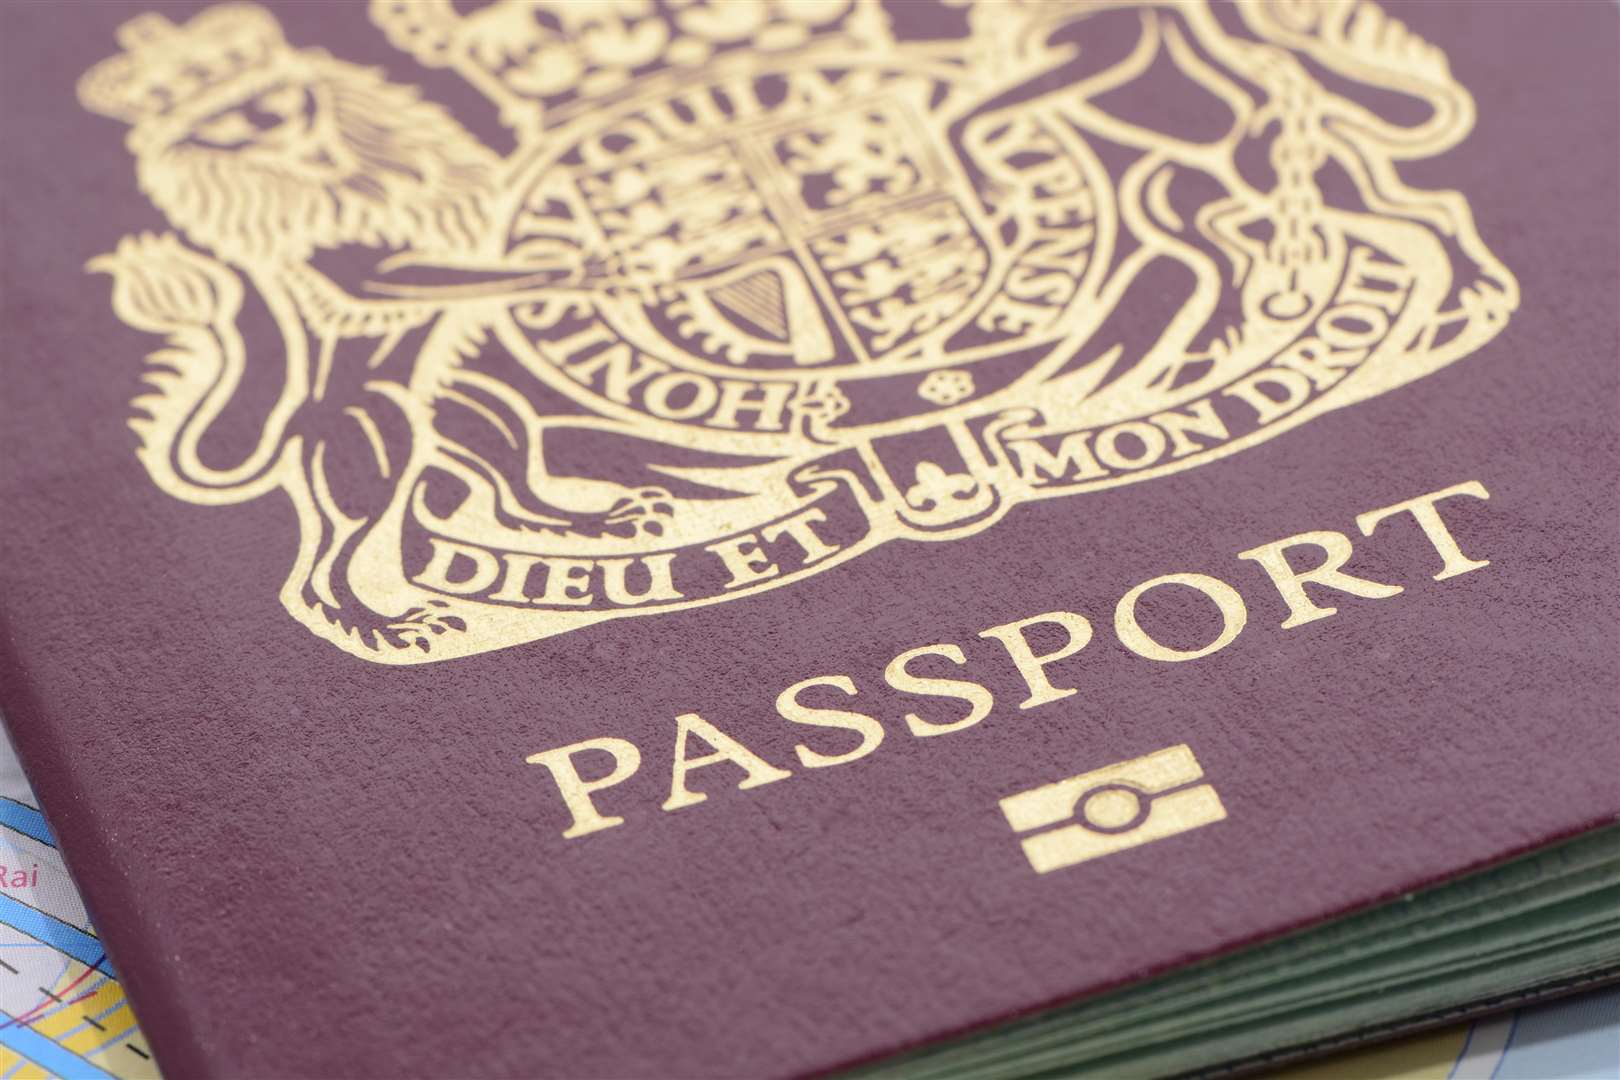 If Brexit continues without a deal there are likely to be changes to travel and passport requirements